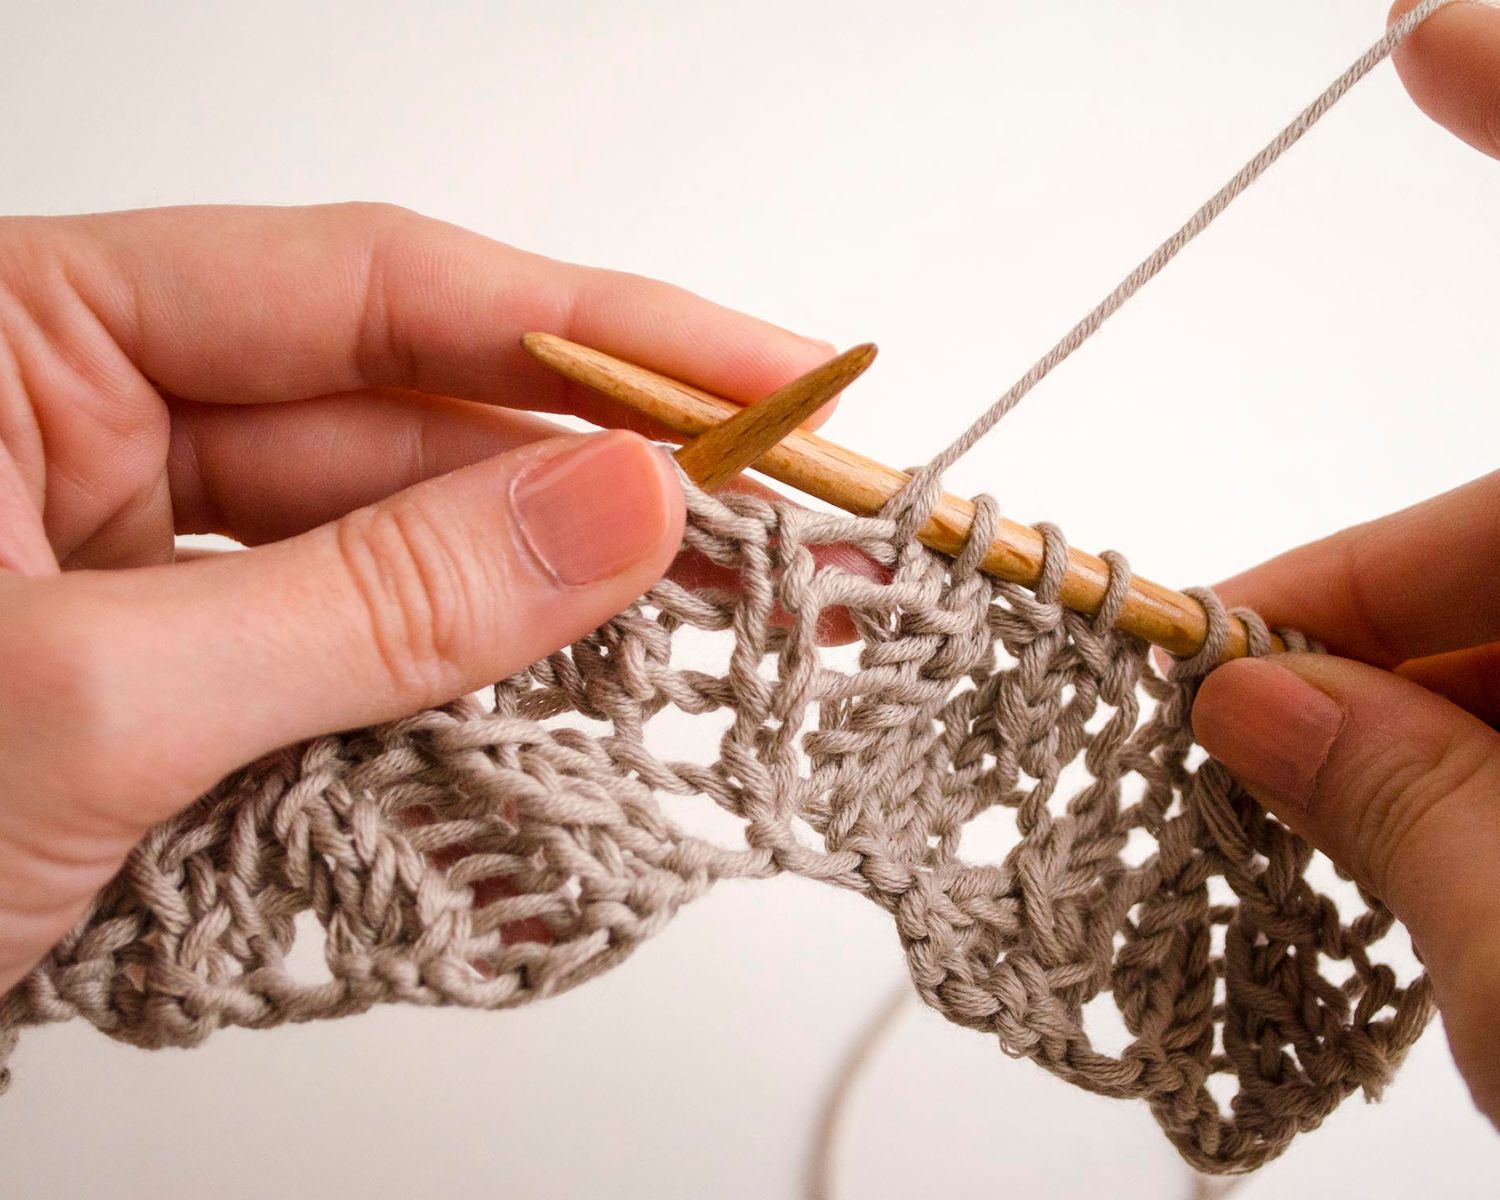 19-captivating-facts-about-lace-knitting